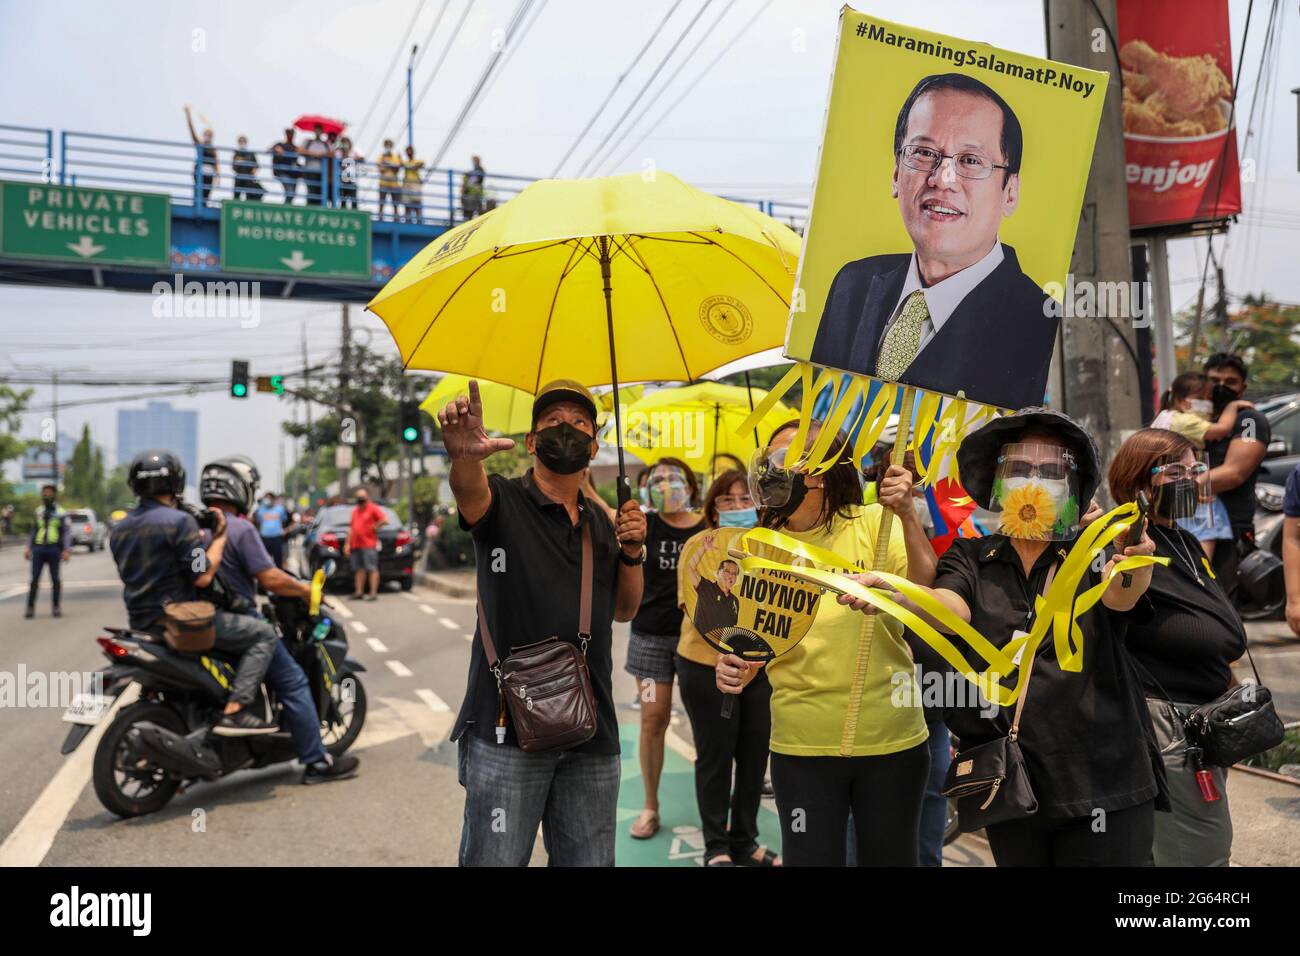 Supporters carry signs as they gather beside the motorcade of former Philippine President Benigno Aquino III before his burial in Quezon City, Philippines. Stock Photo